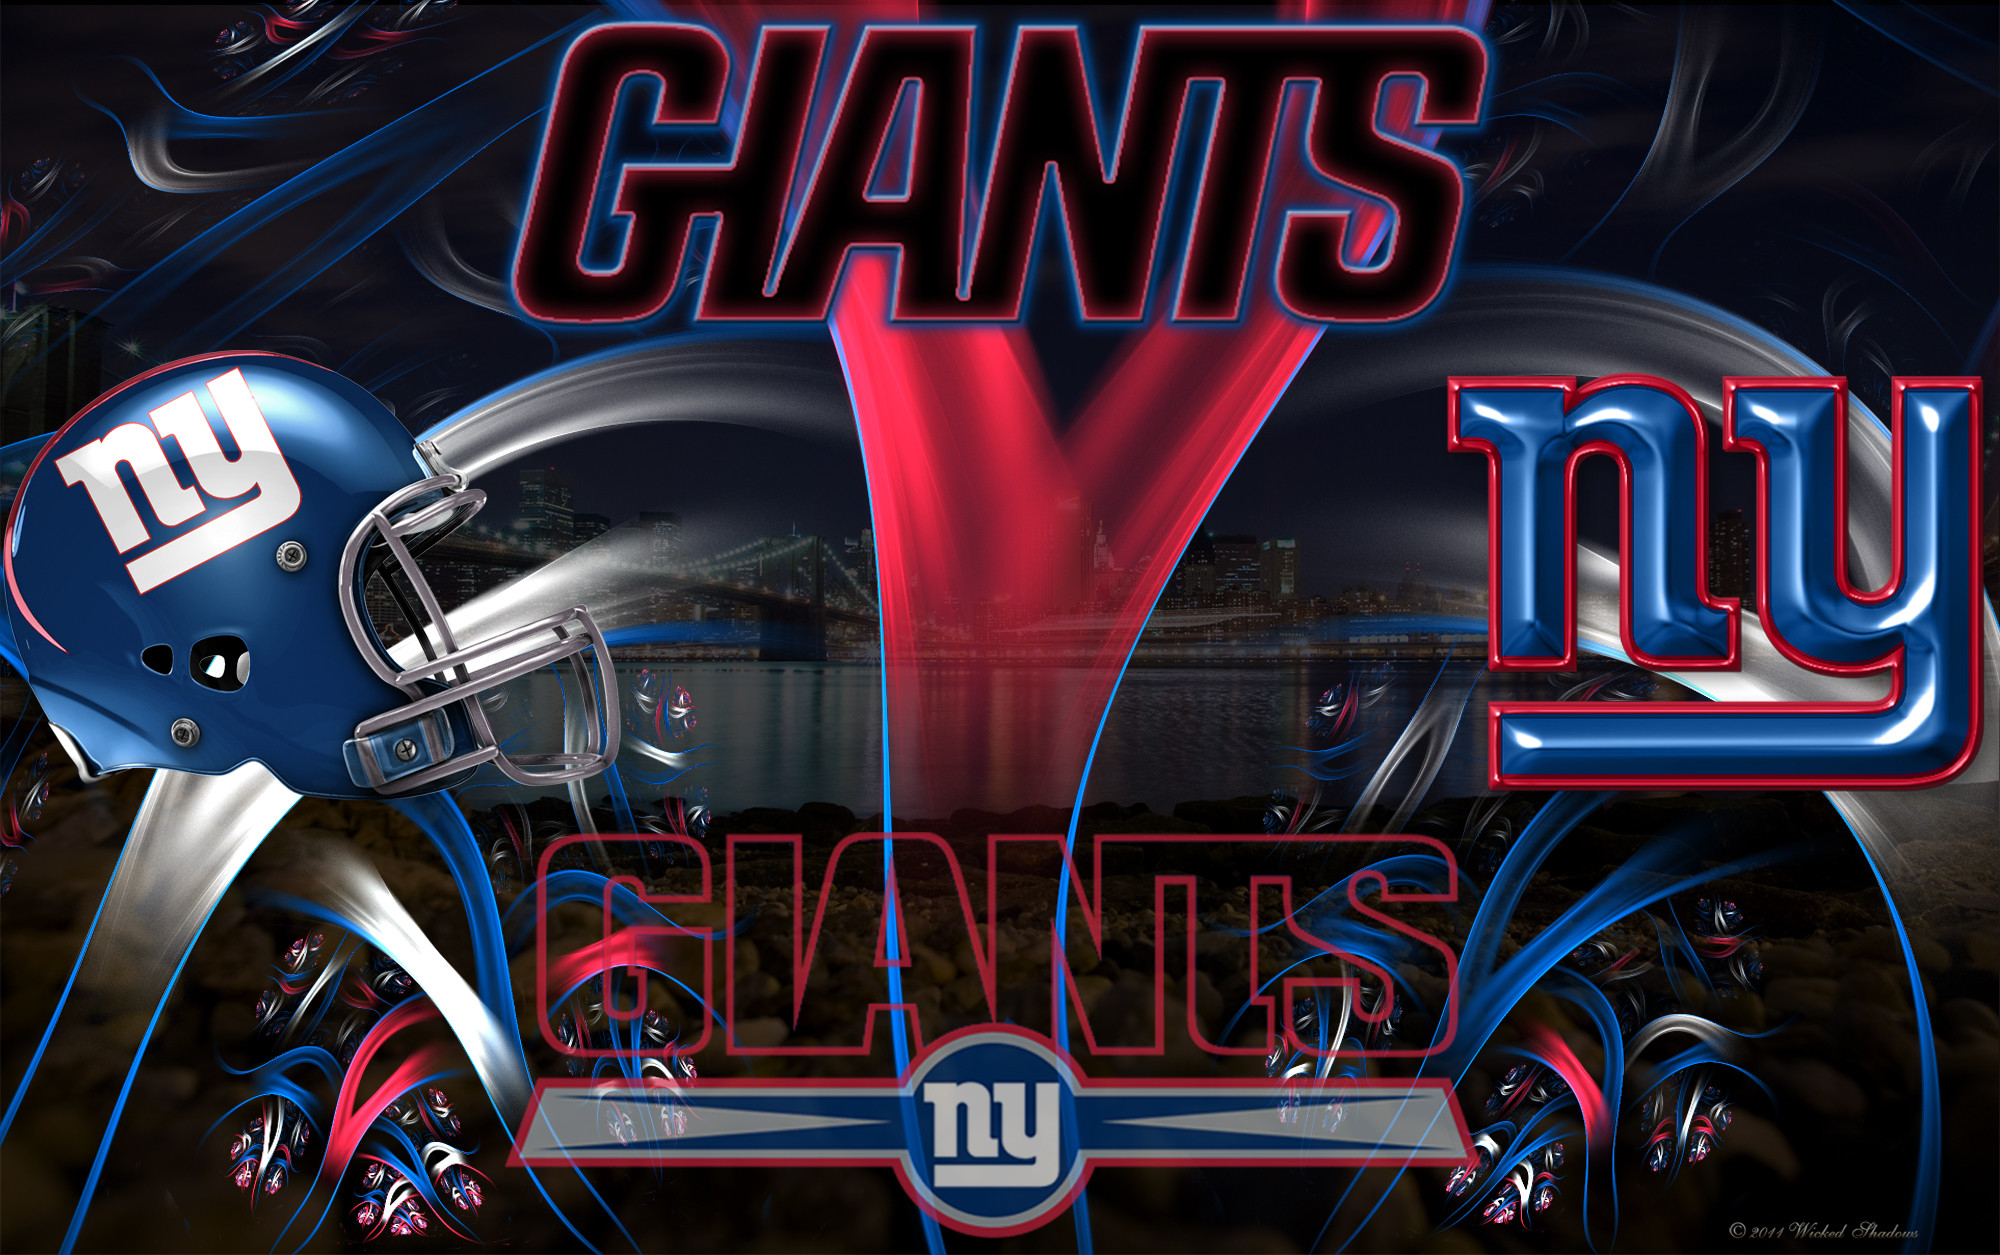 New York Giants Wicked Wallpaper - Ny Giants Cover Photo Facebook - HD Wallpaper 